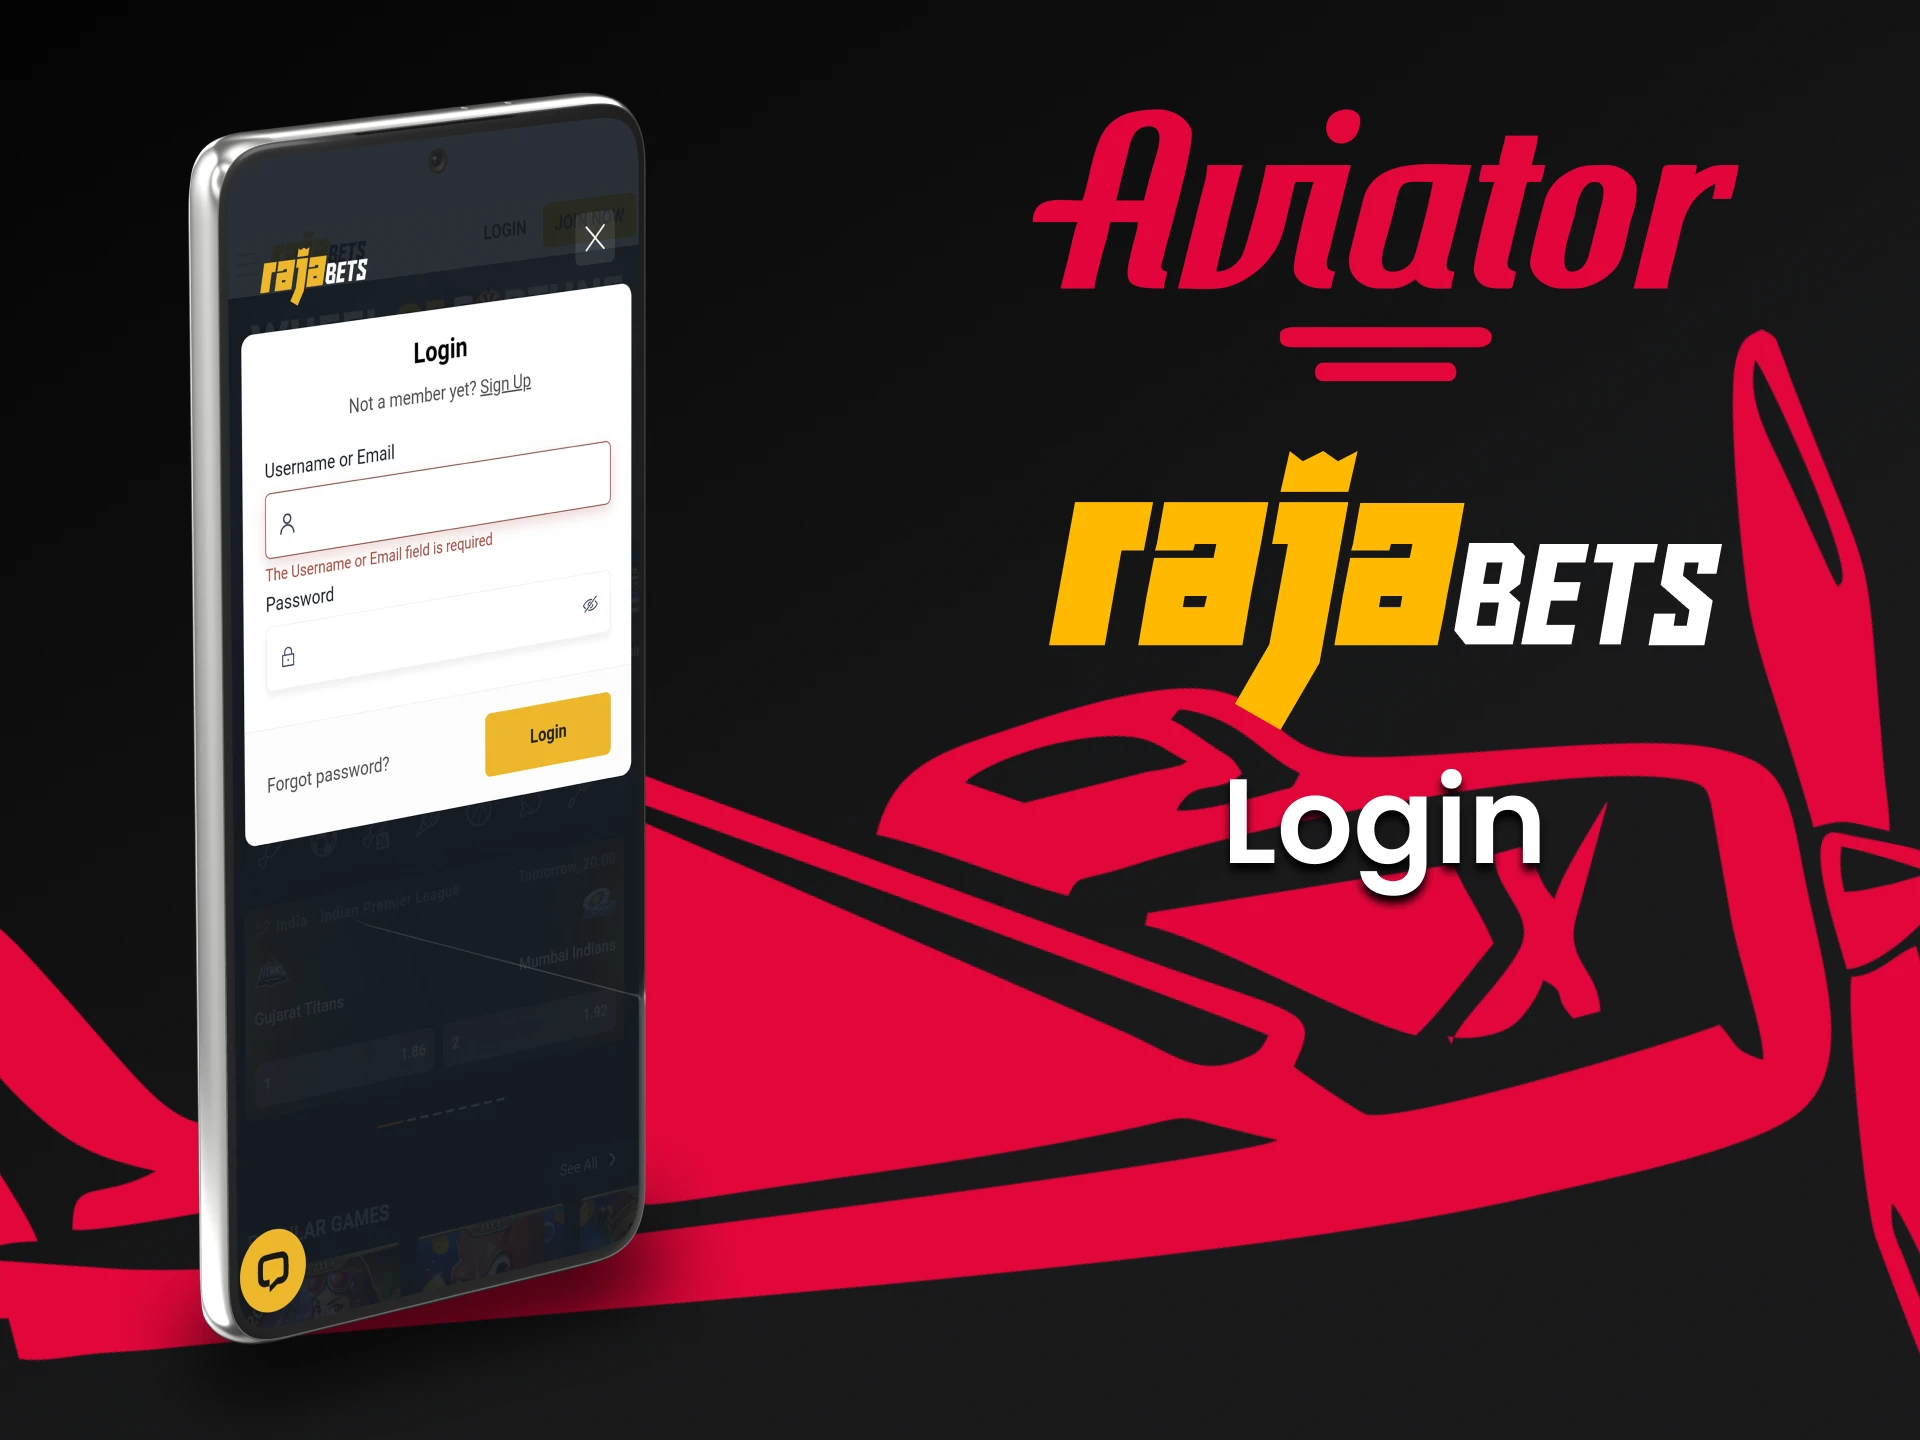 Log into your personal Rajabets account and start playing Aviator.